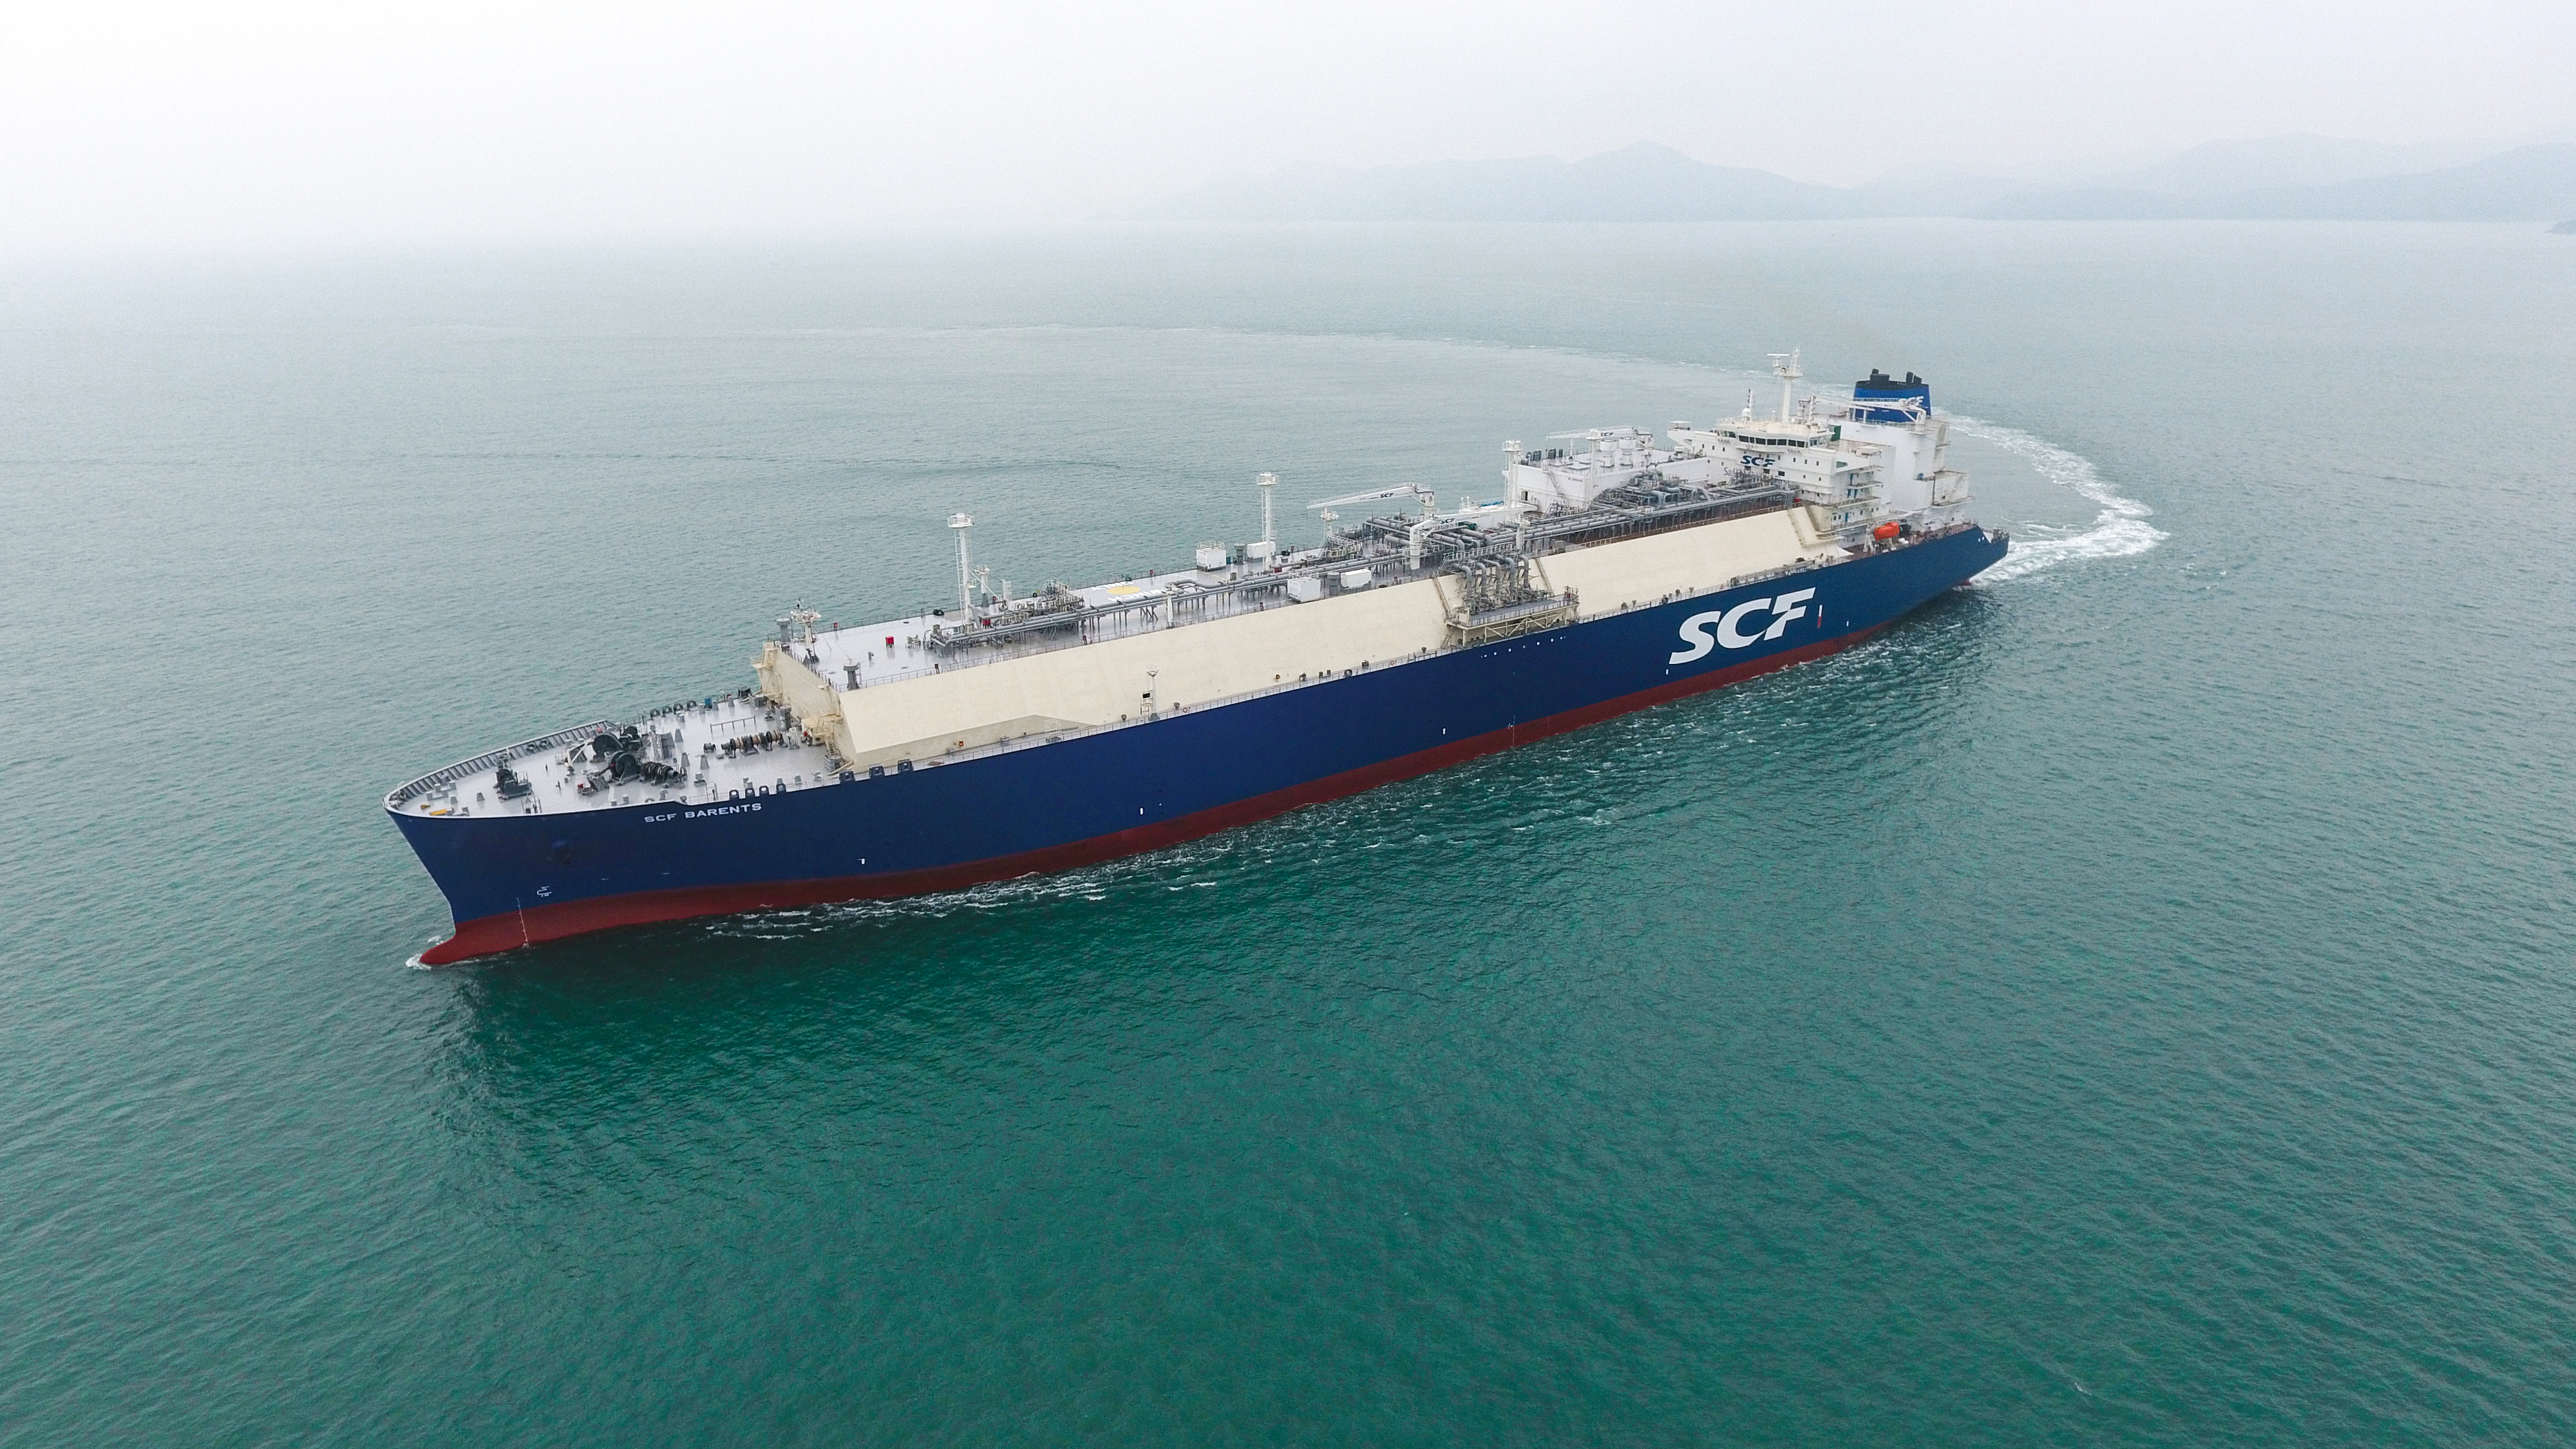 SCF takes delivery of SCF Barents – a new LNG carrier chartered to Shell